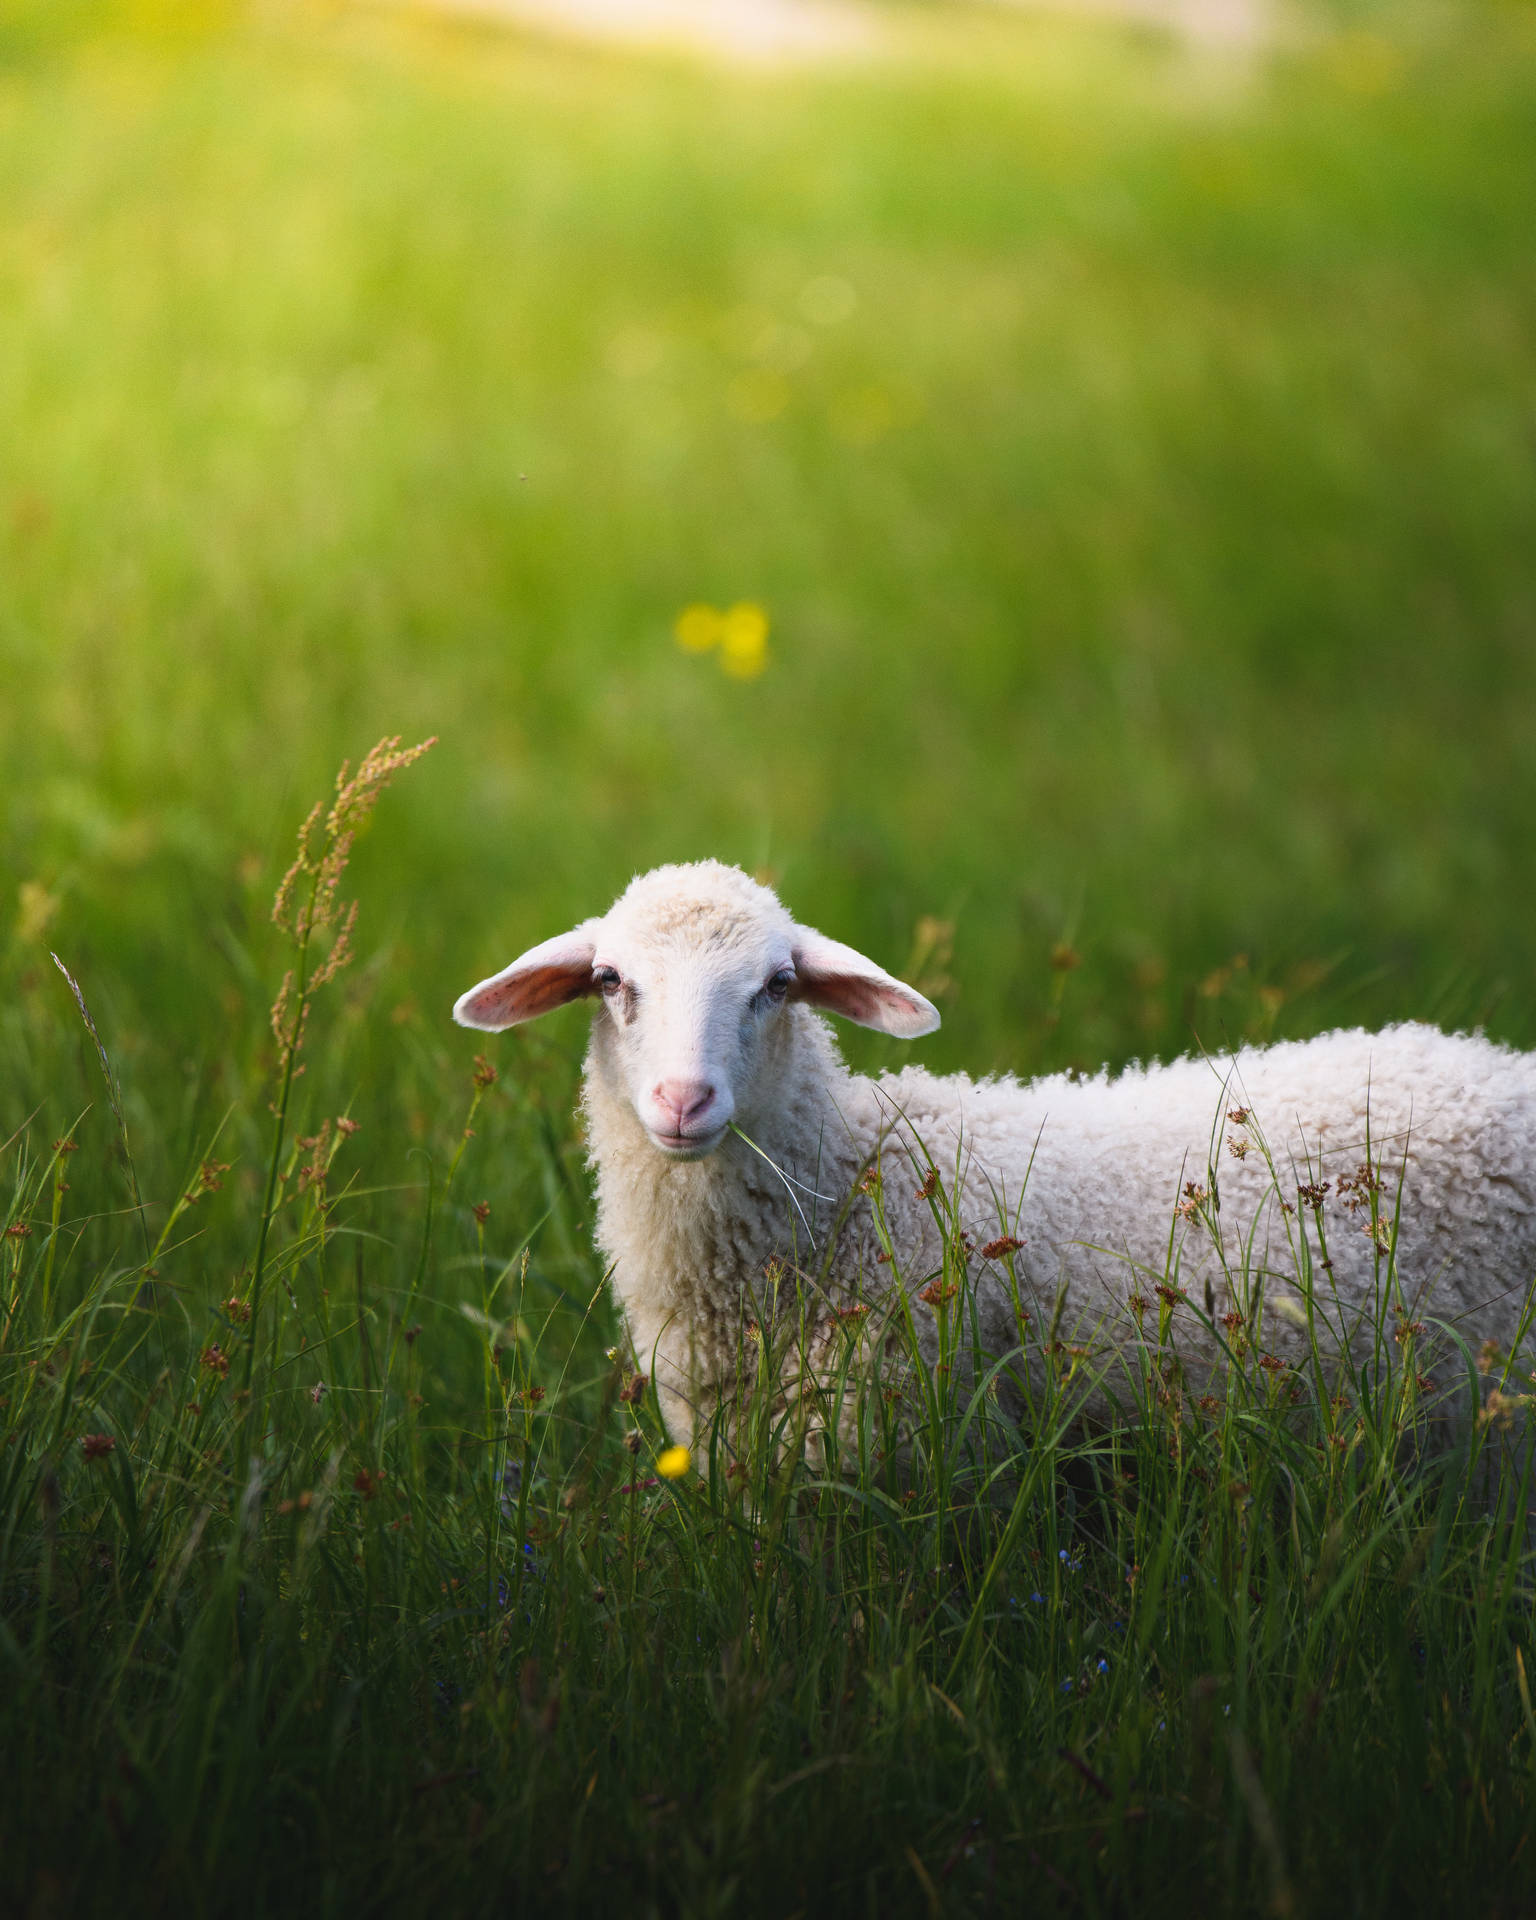 A White Sheep Sitting Peacefully In The Field Wallpaper